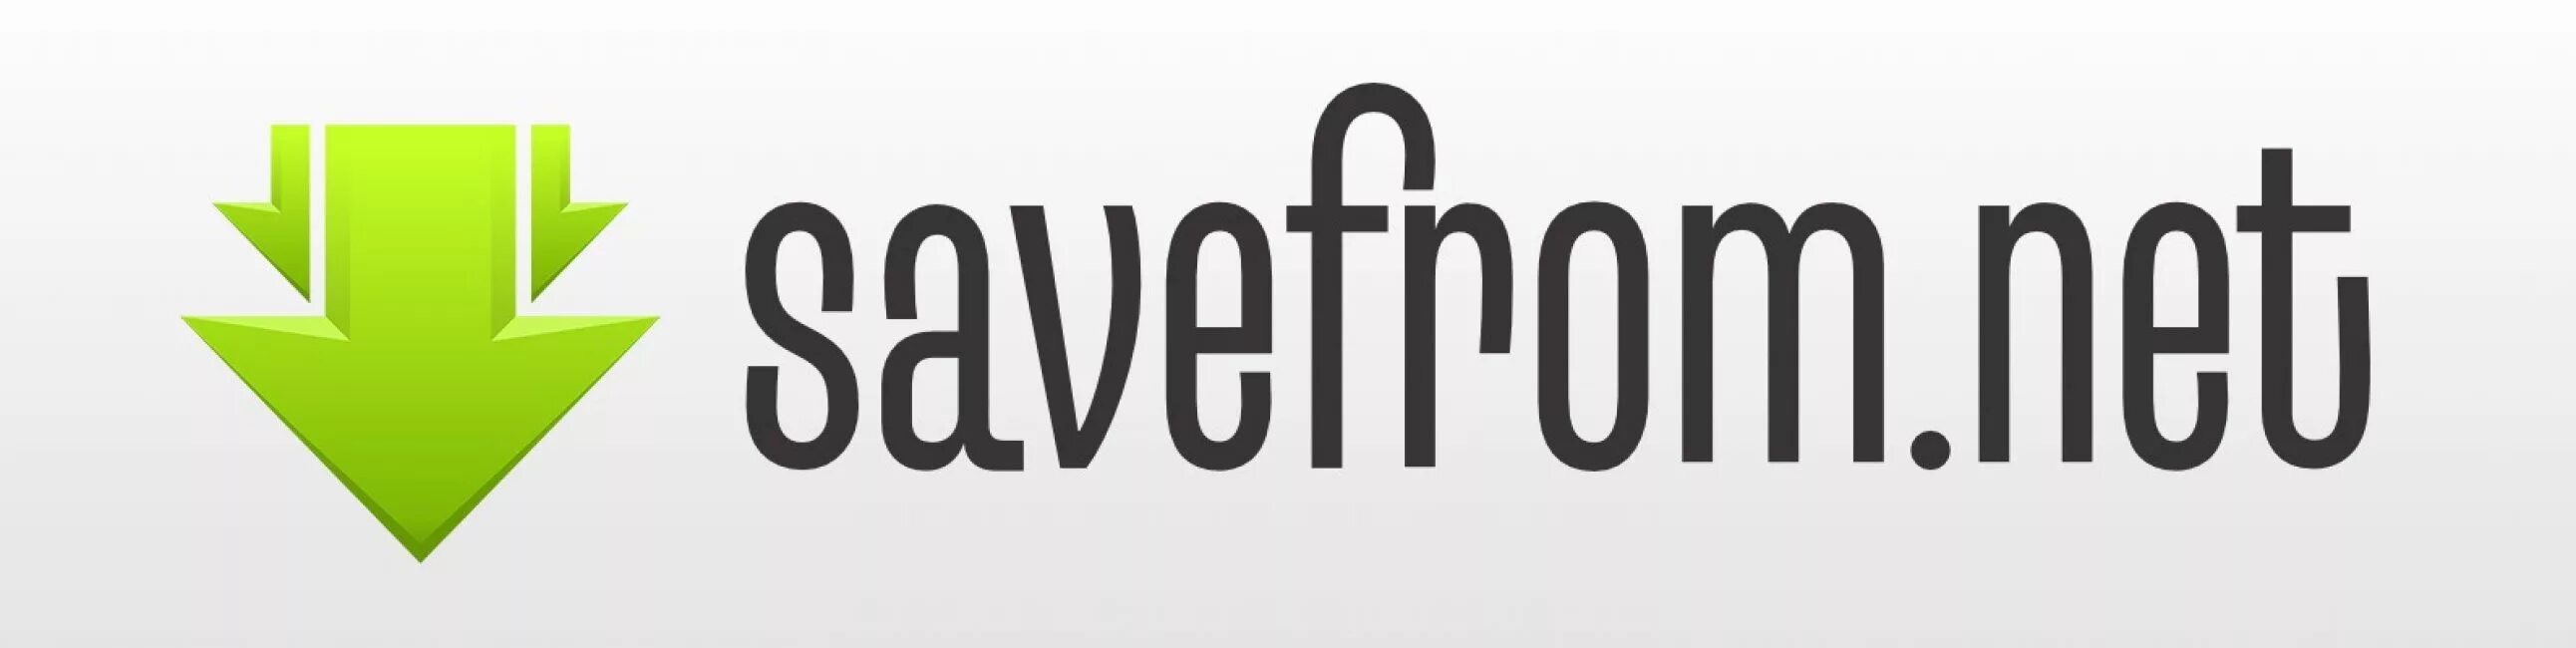 Savefrom. Savefrom.net иконка. Savefrom логотип. Safe from. Sevefrome net